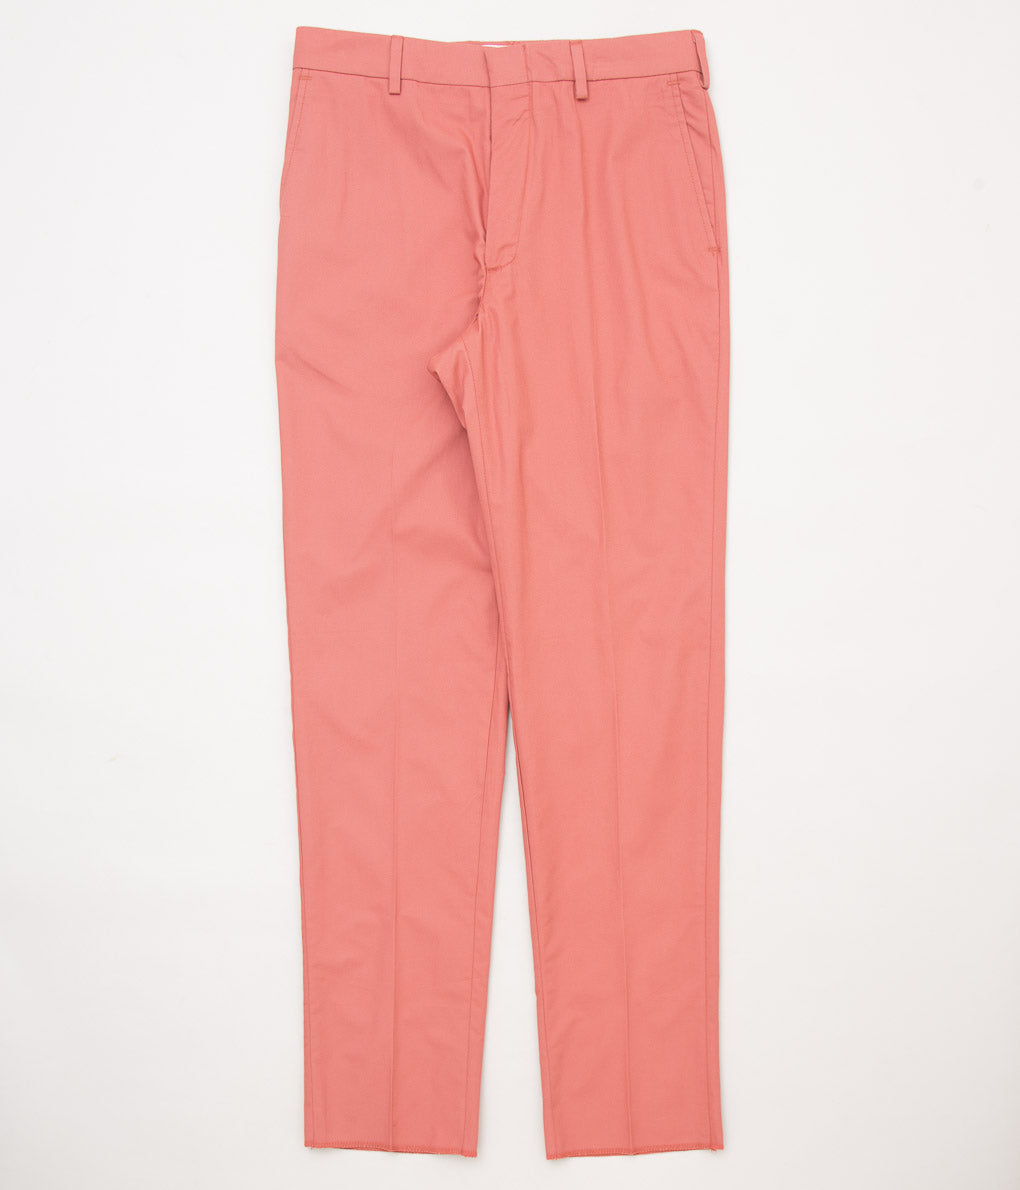 ALL AMERICAN KHAKIS "SEA ISLAND POPLIN (RELAXED FIT)"(NAUTICAL RED)